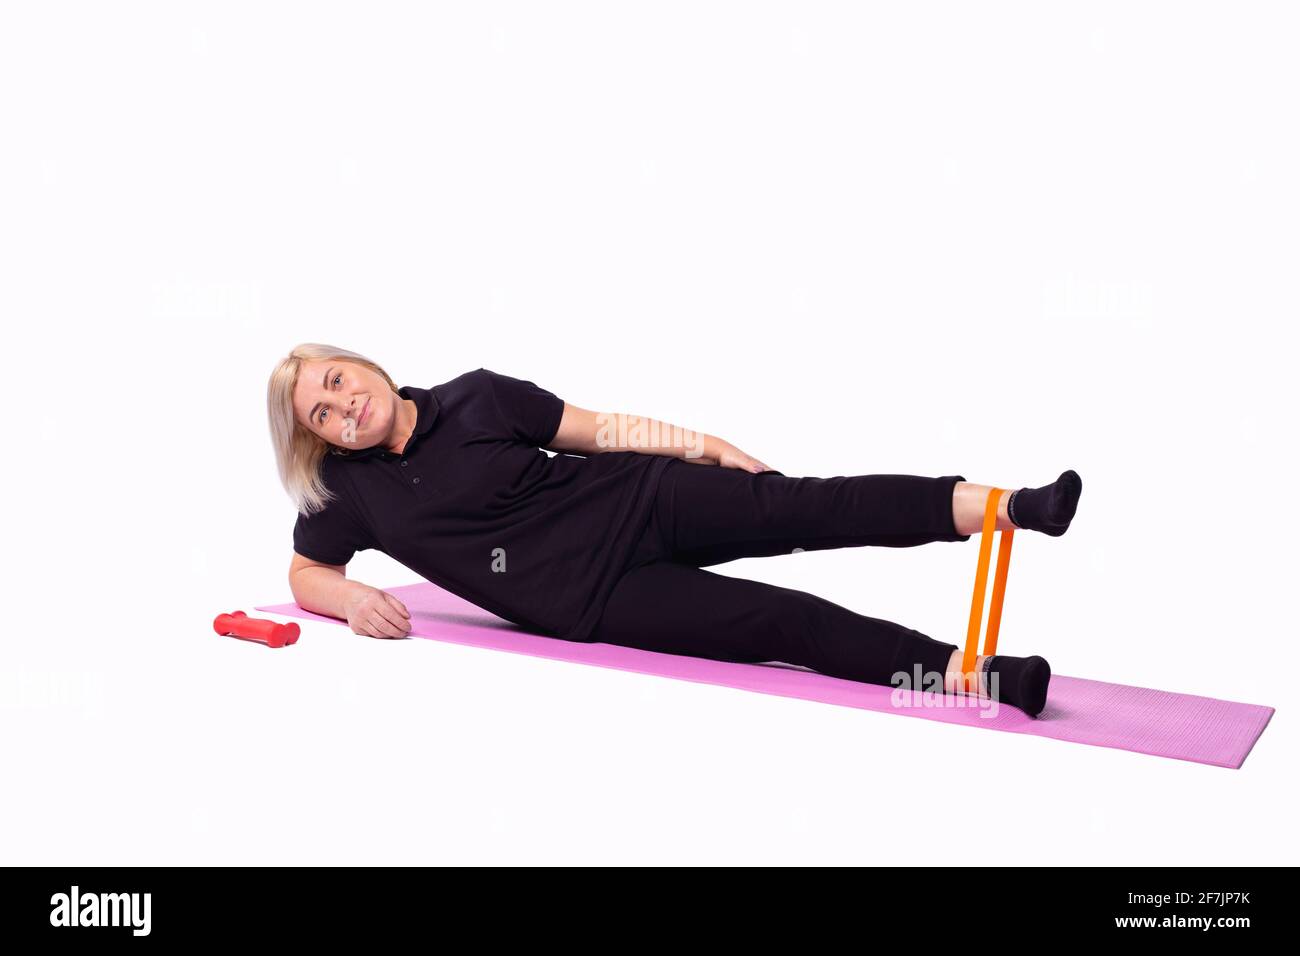 Upper Leg Stretches Utilizing A Resistance Band.